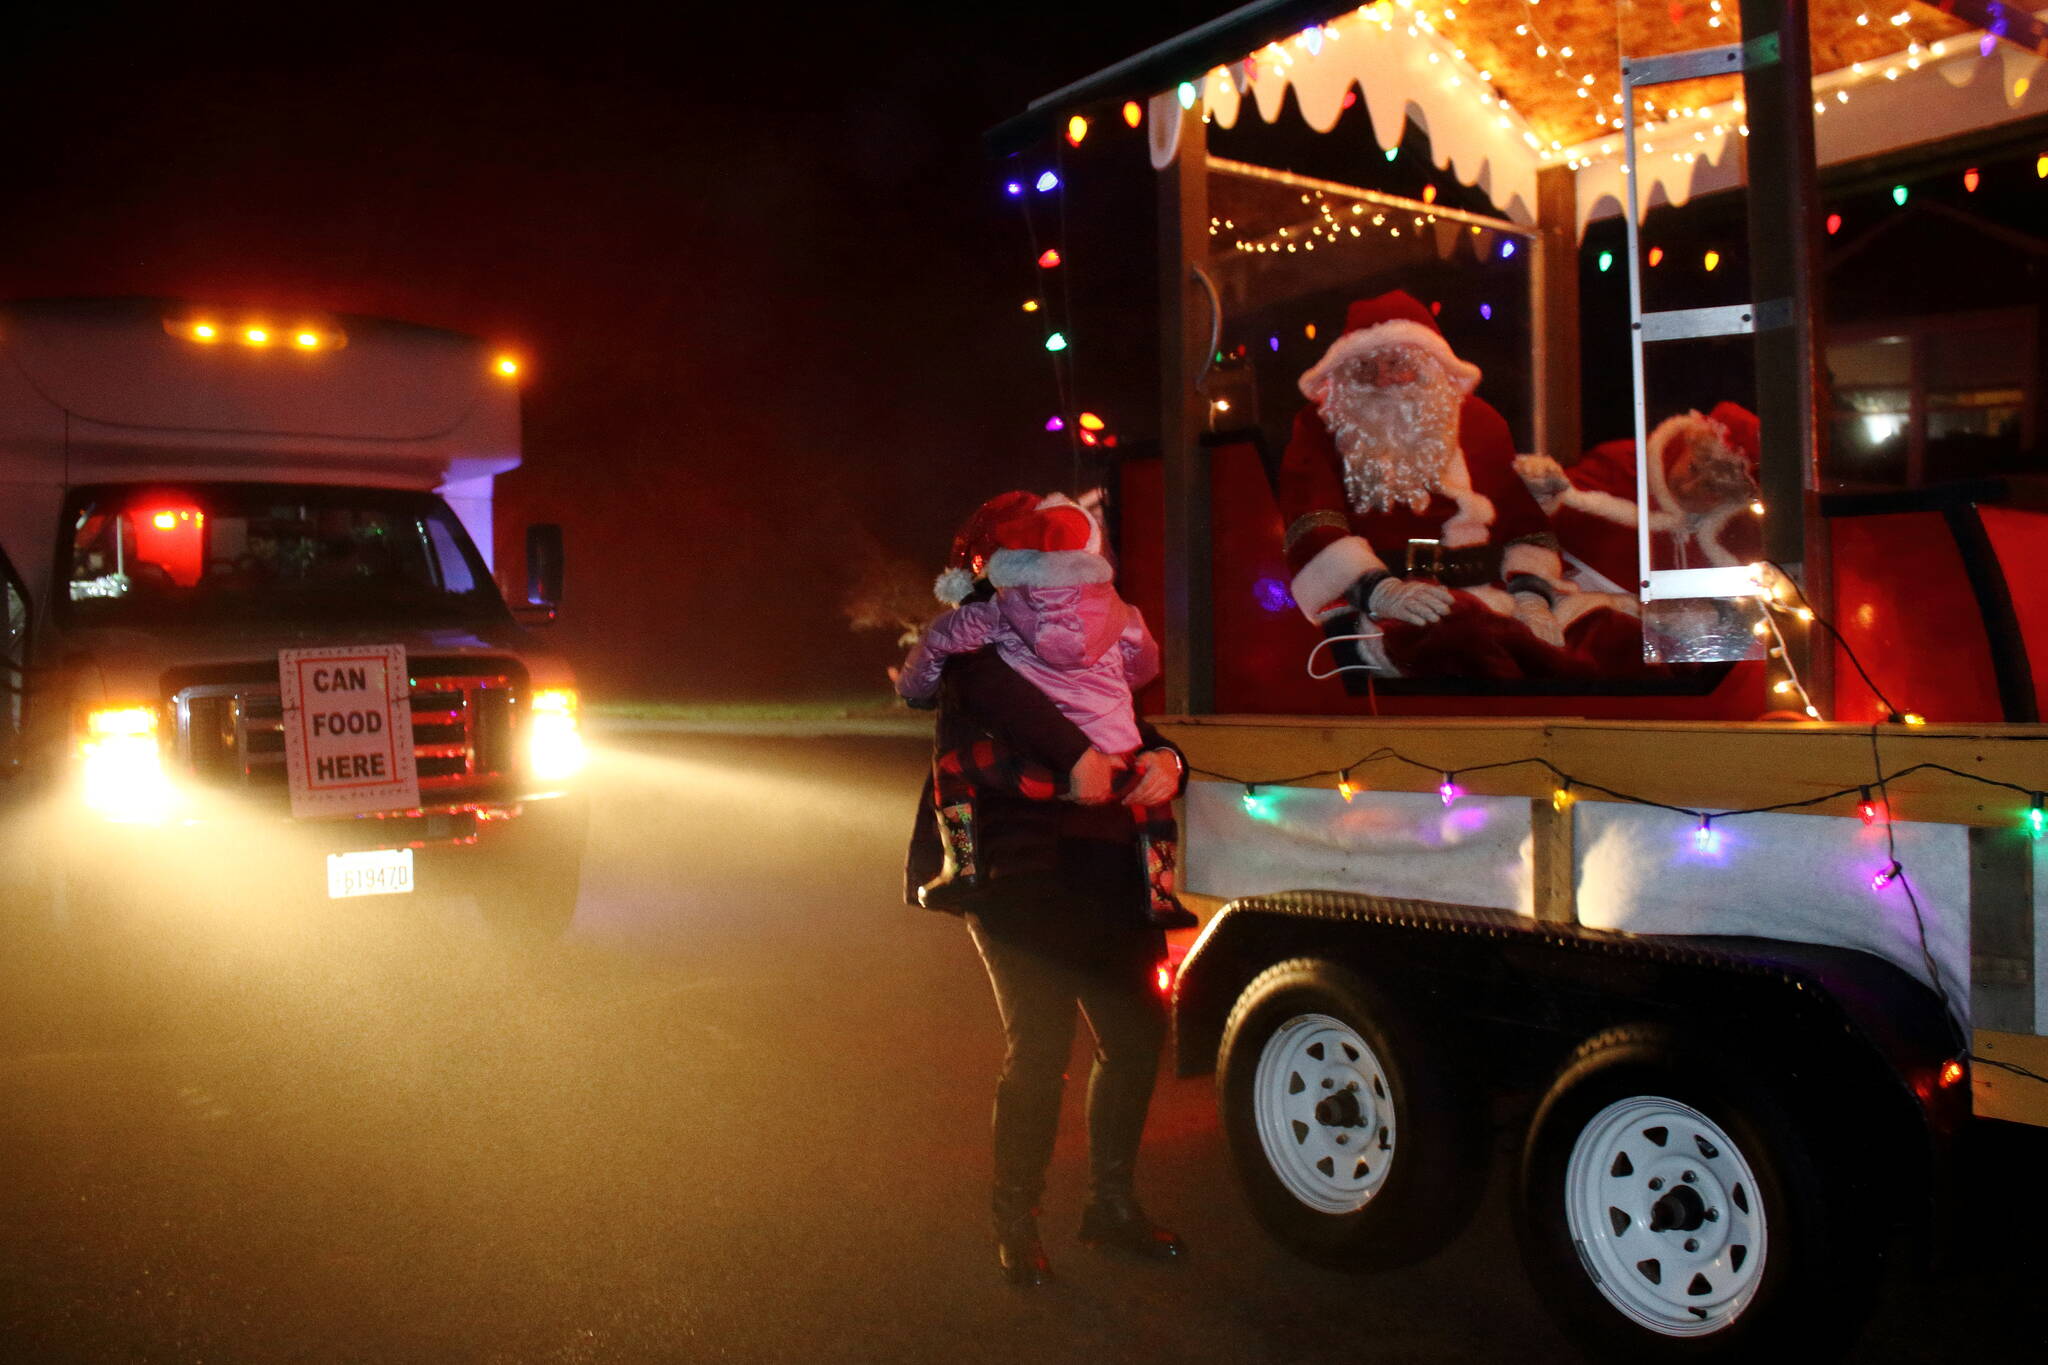 Families enjoyed meeting Santa during the parade on Dec. 12. Photo by Keelin Everly-Lang / The Mirror